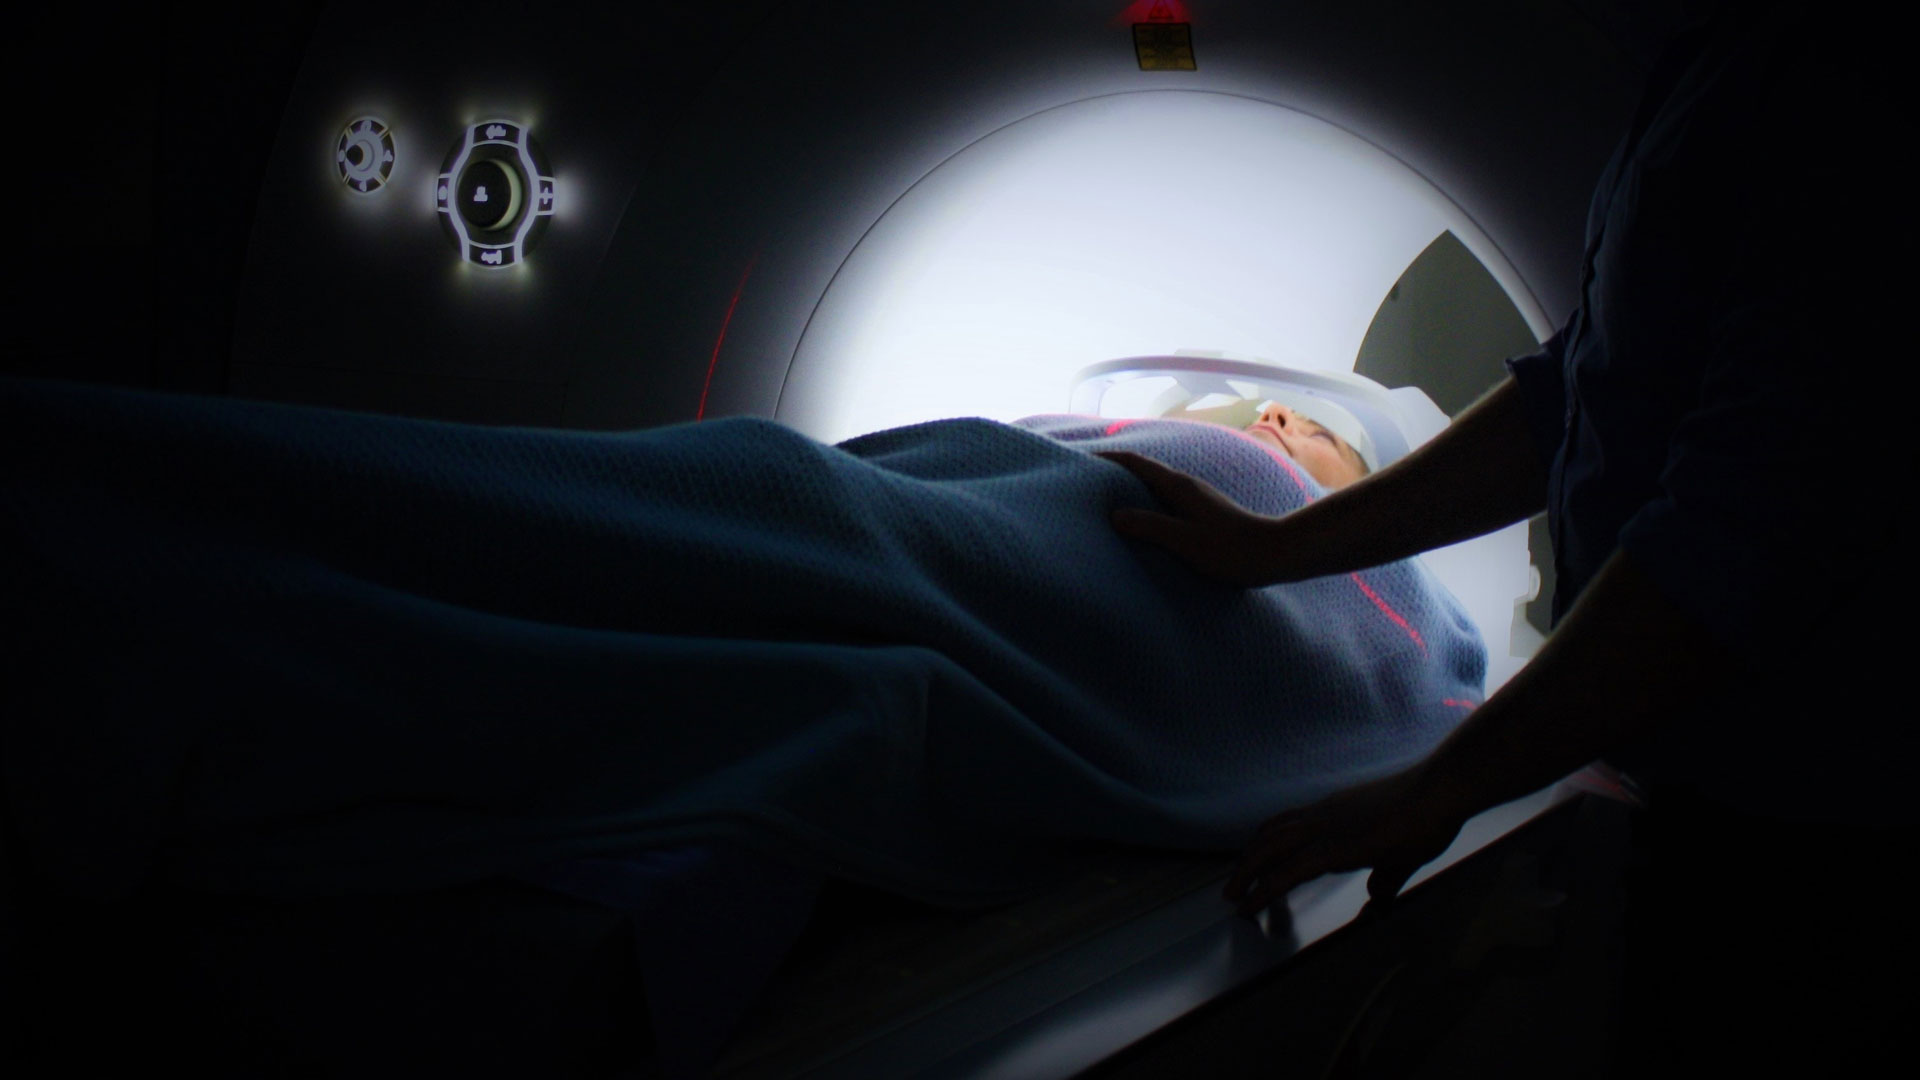 Why Choose Extreme Magnets as The Right MRI Systems